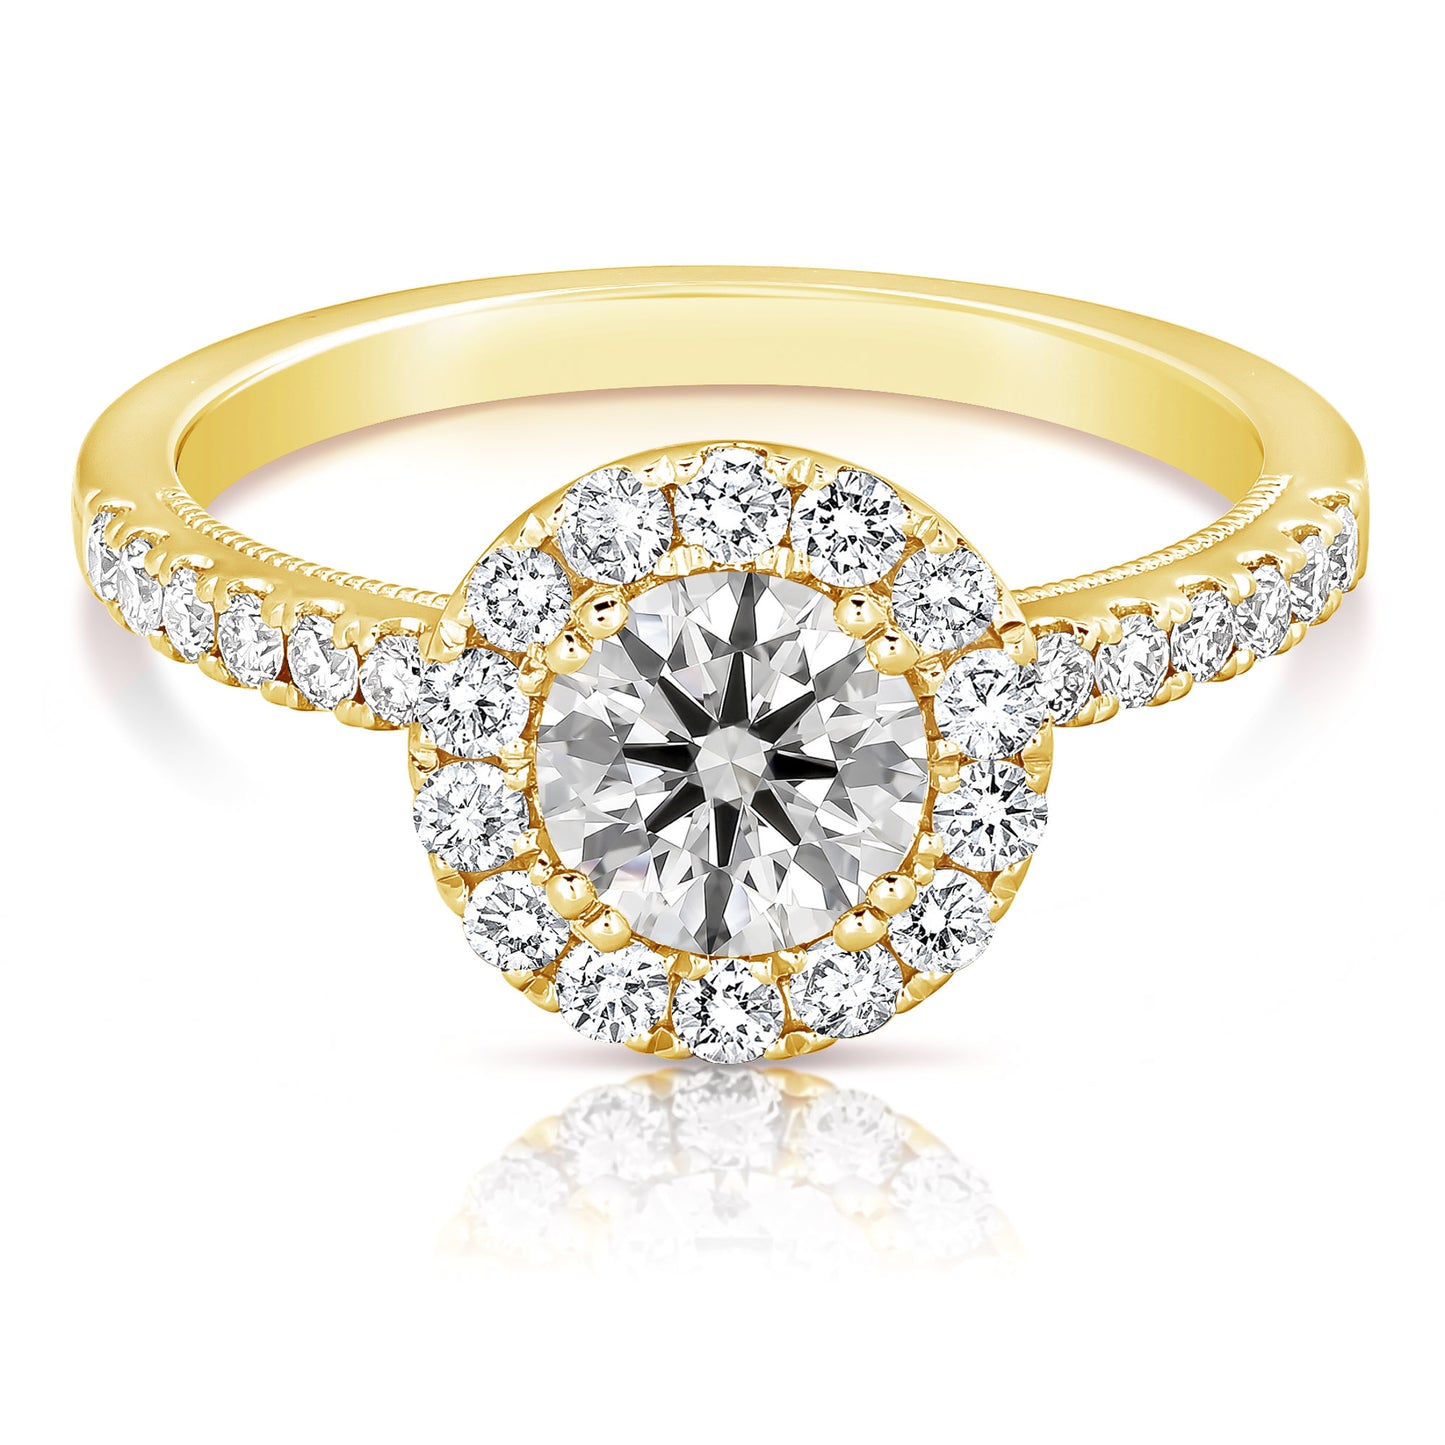 Load image into Gallery viewer, 1 1/2 CT CENTER ROUND HALO LAB GROWN ENGAGEMENT RING
